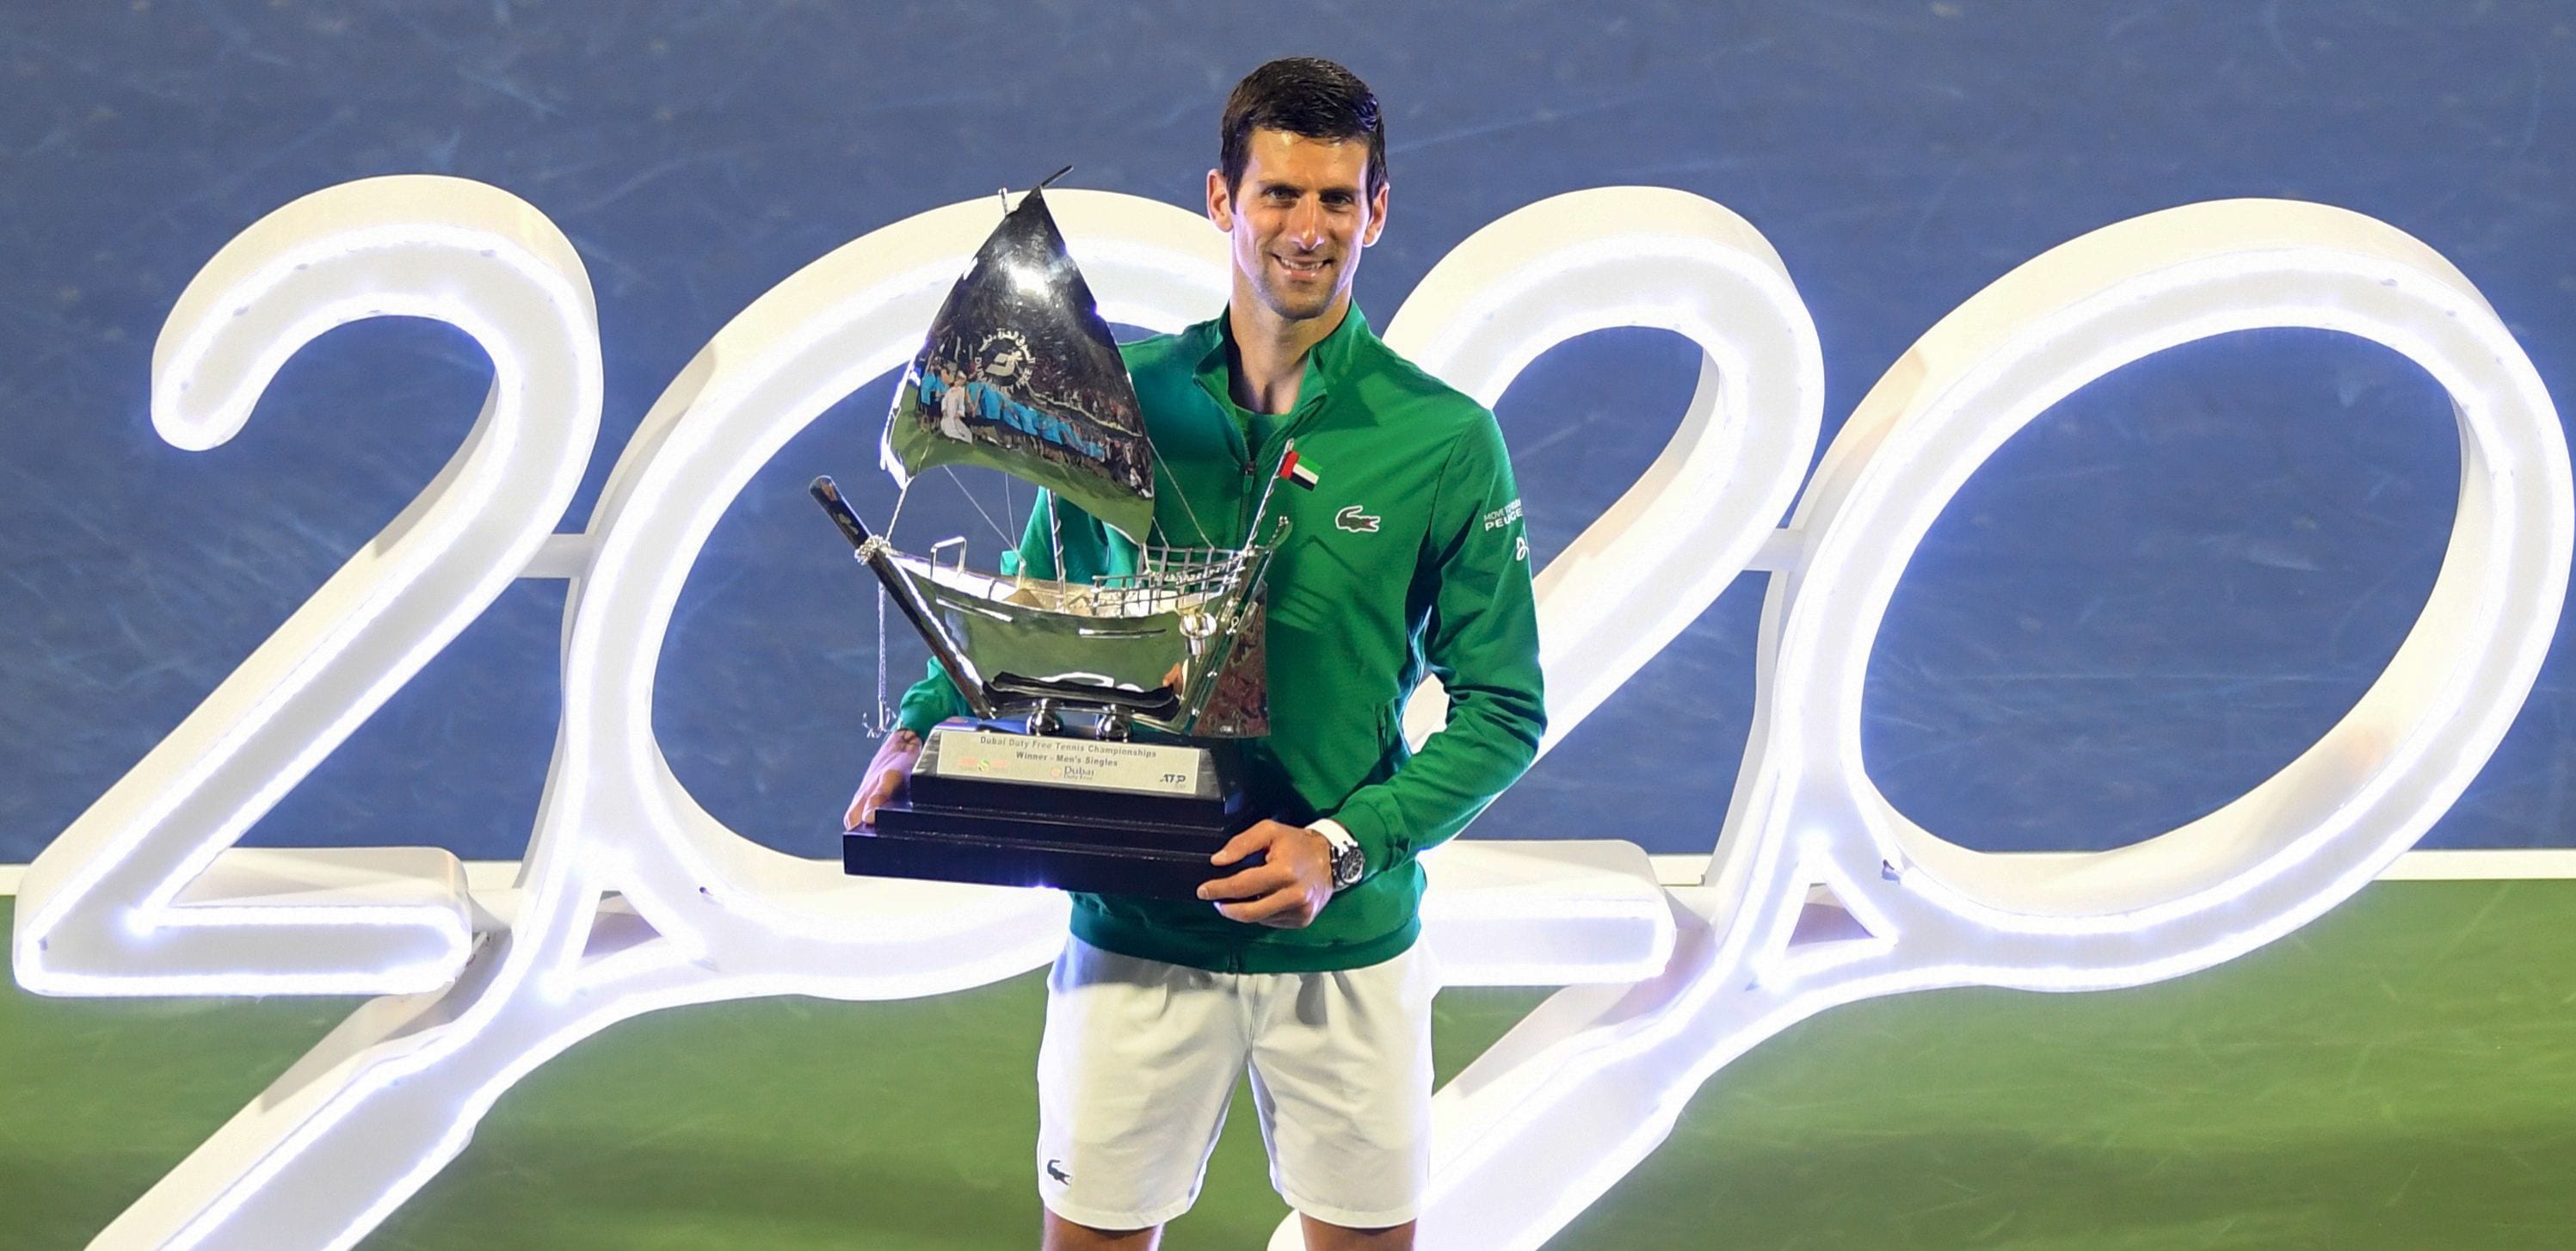 Who were the Top 5 match win leaders on the ATP and WTA Tours in 2020